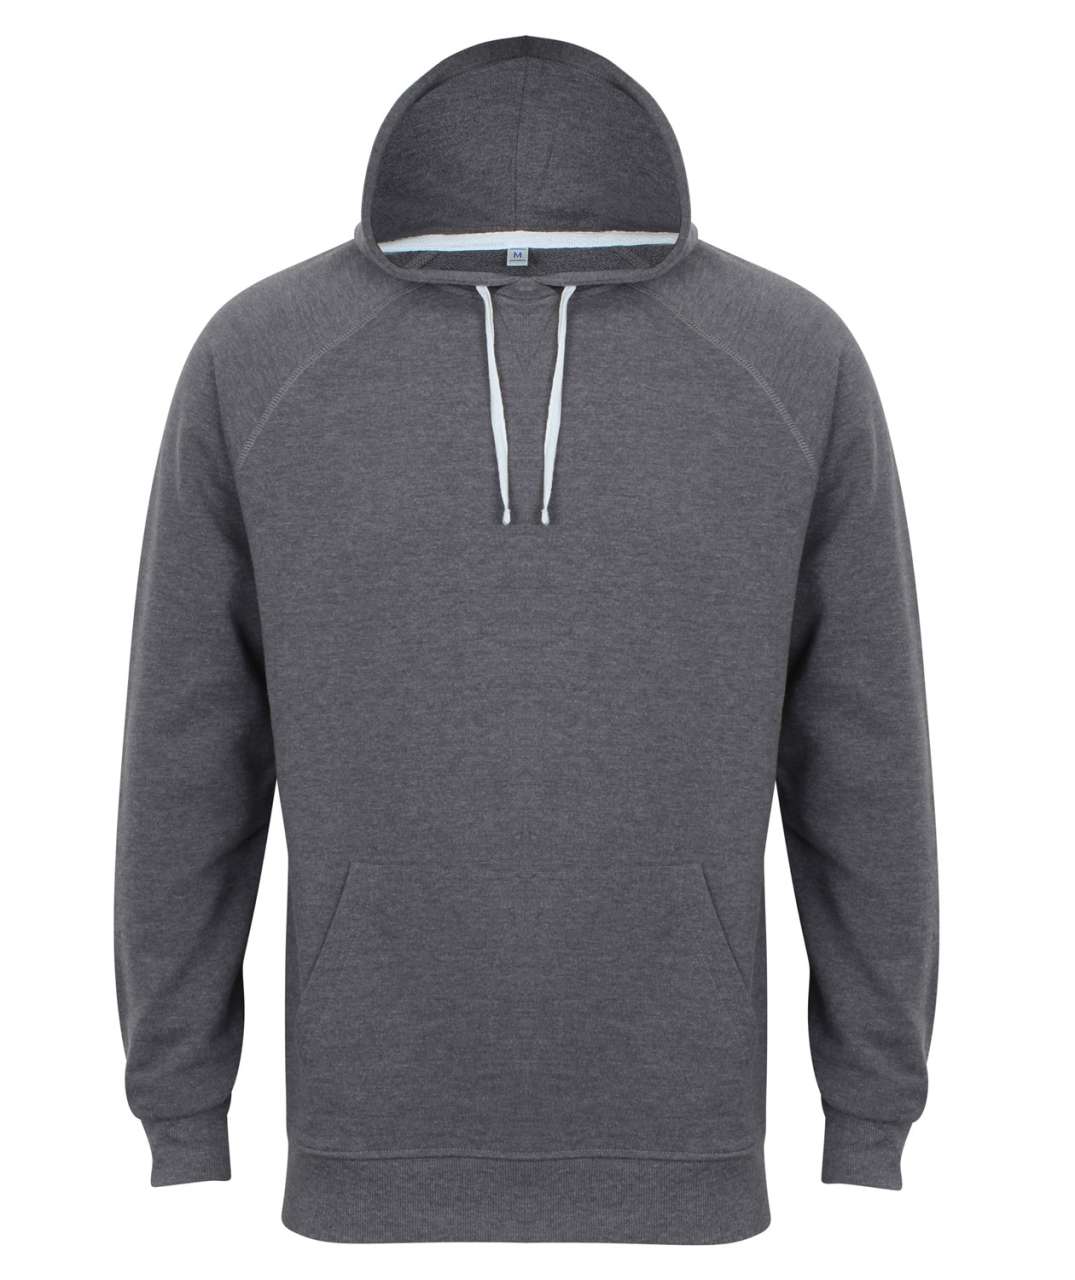 MEN'S FRENCH TERRY HOODIE